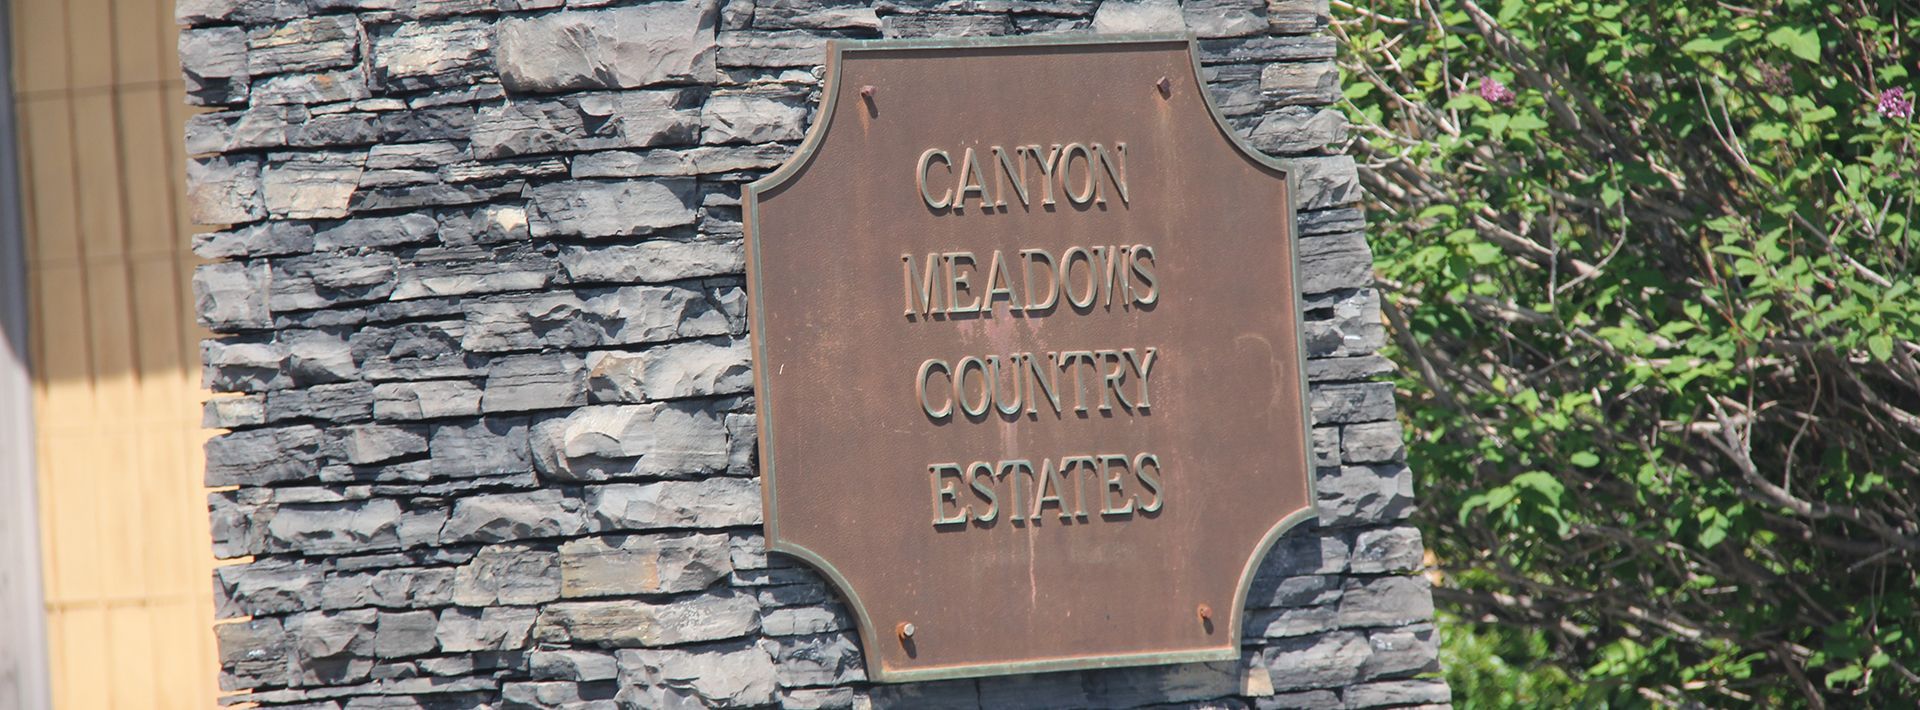 A sign on a stone wall that says Cannon meadows country estates